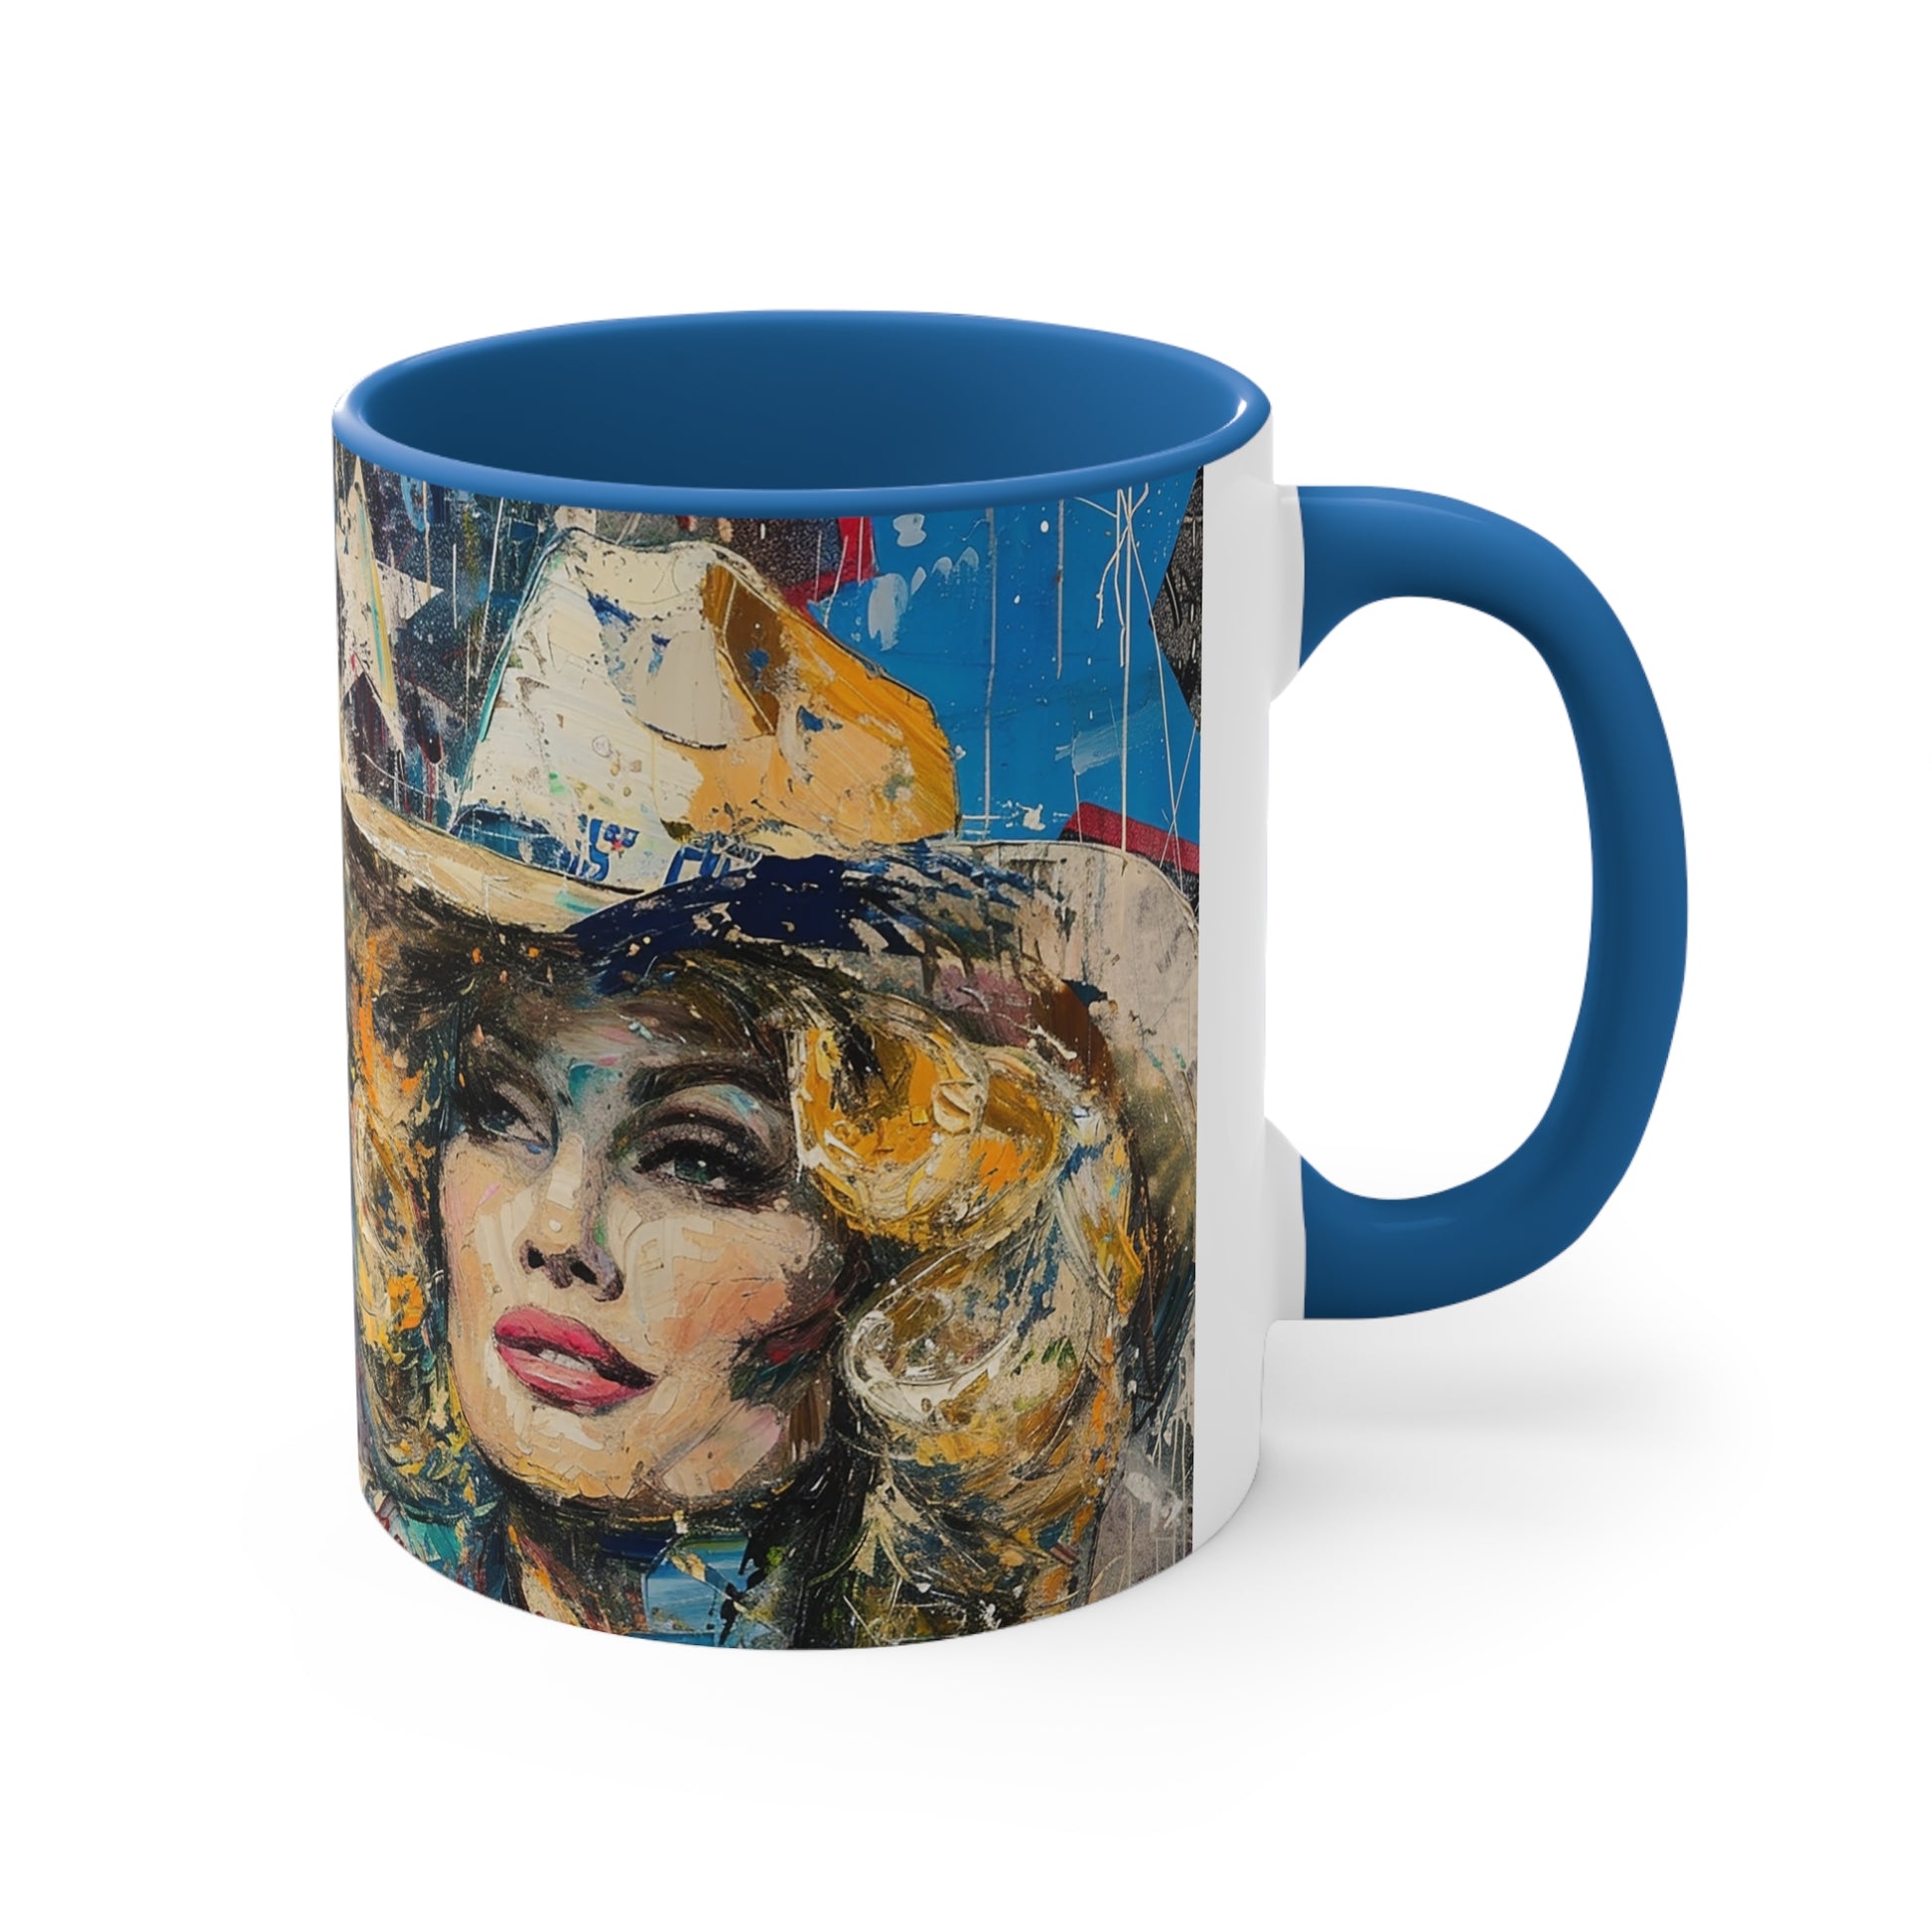 Accent Coffee Mug, 11oz - Country Queen blue side